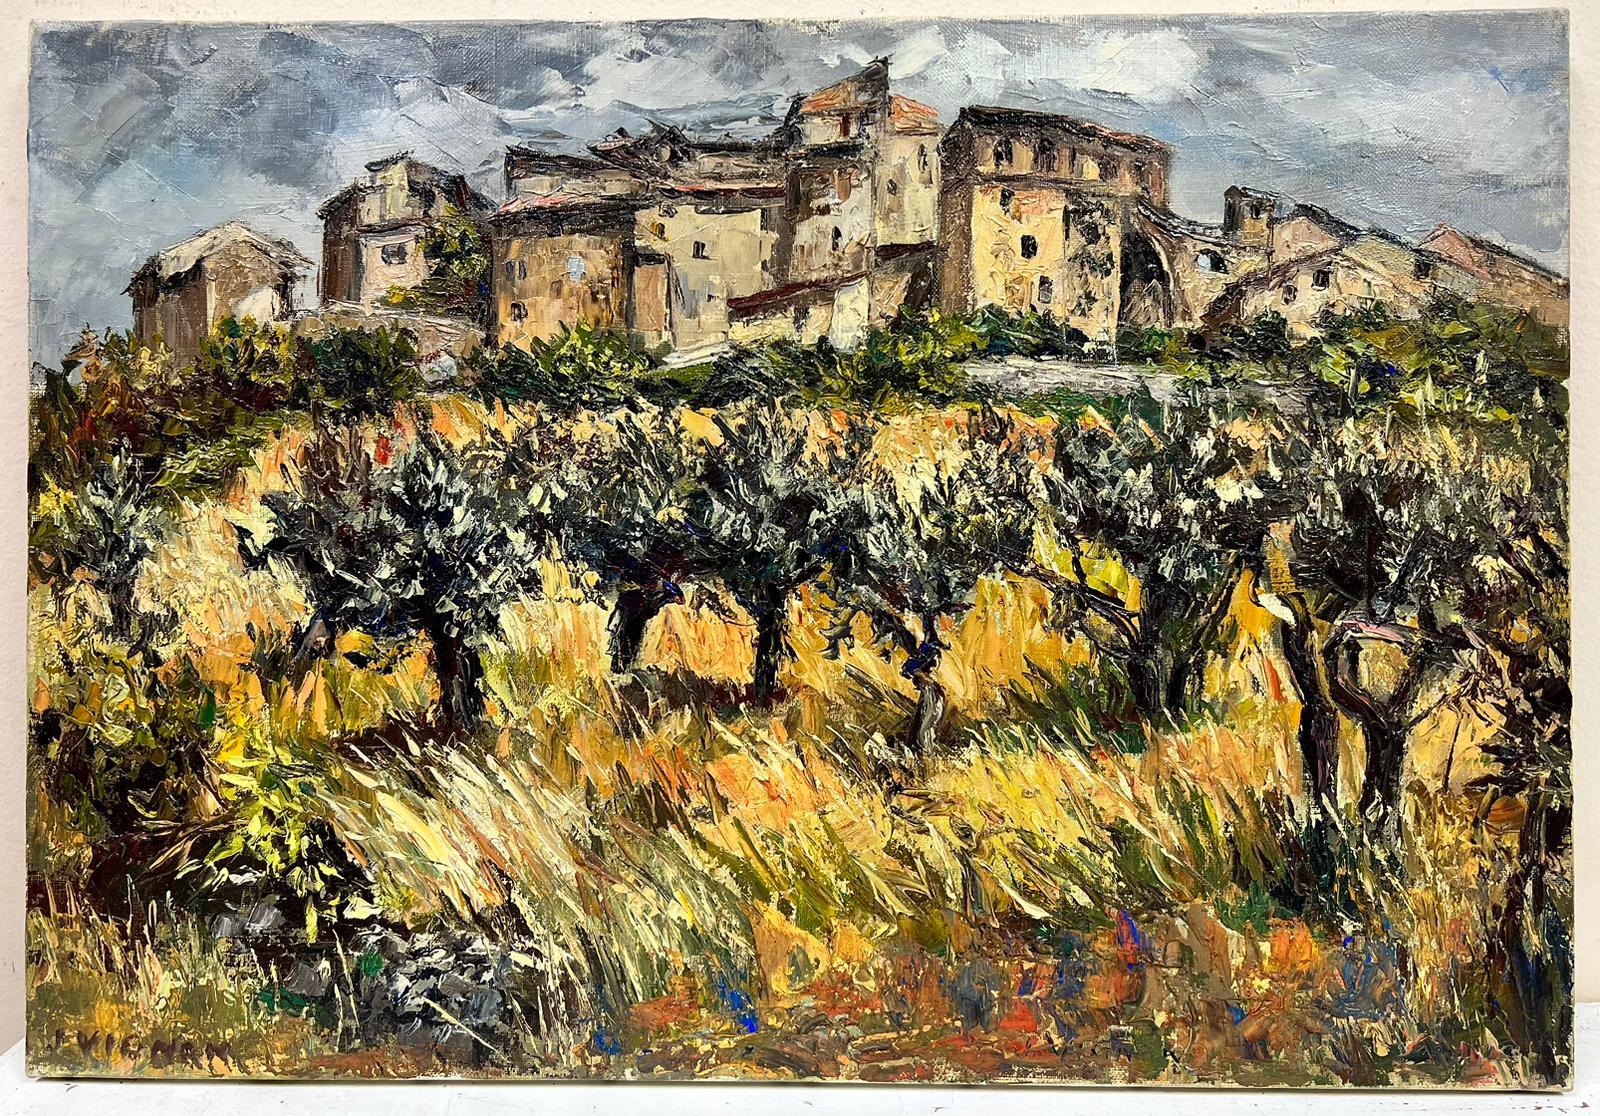 Provence Olive Groves
by Josine Vignon (French 1922-2022)
signed on front and back
oil painting on canvas, unframed

canvas: 15 x 21.5 inches

Colors: Green colors, black, brown, beige, grey and blue

Very good condition

Provenance: from the